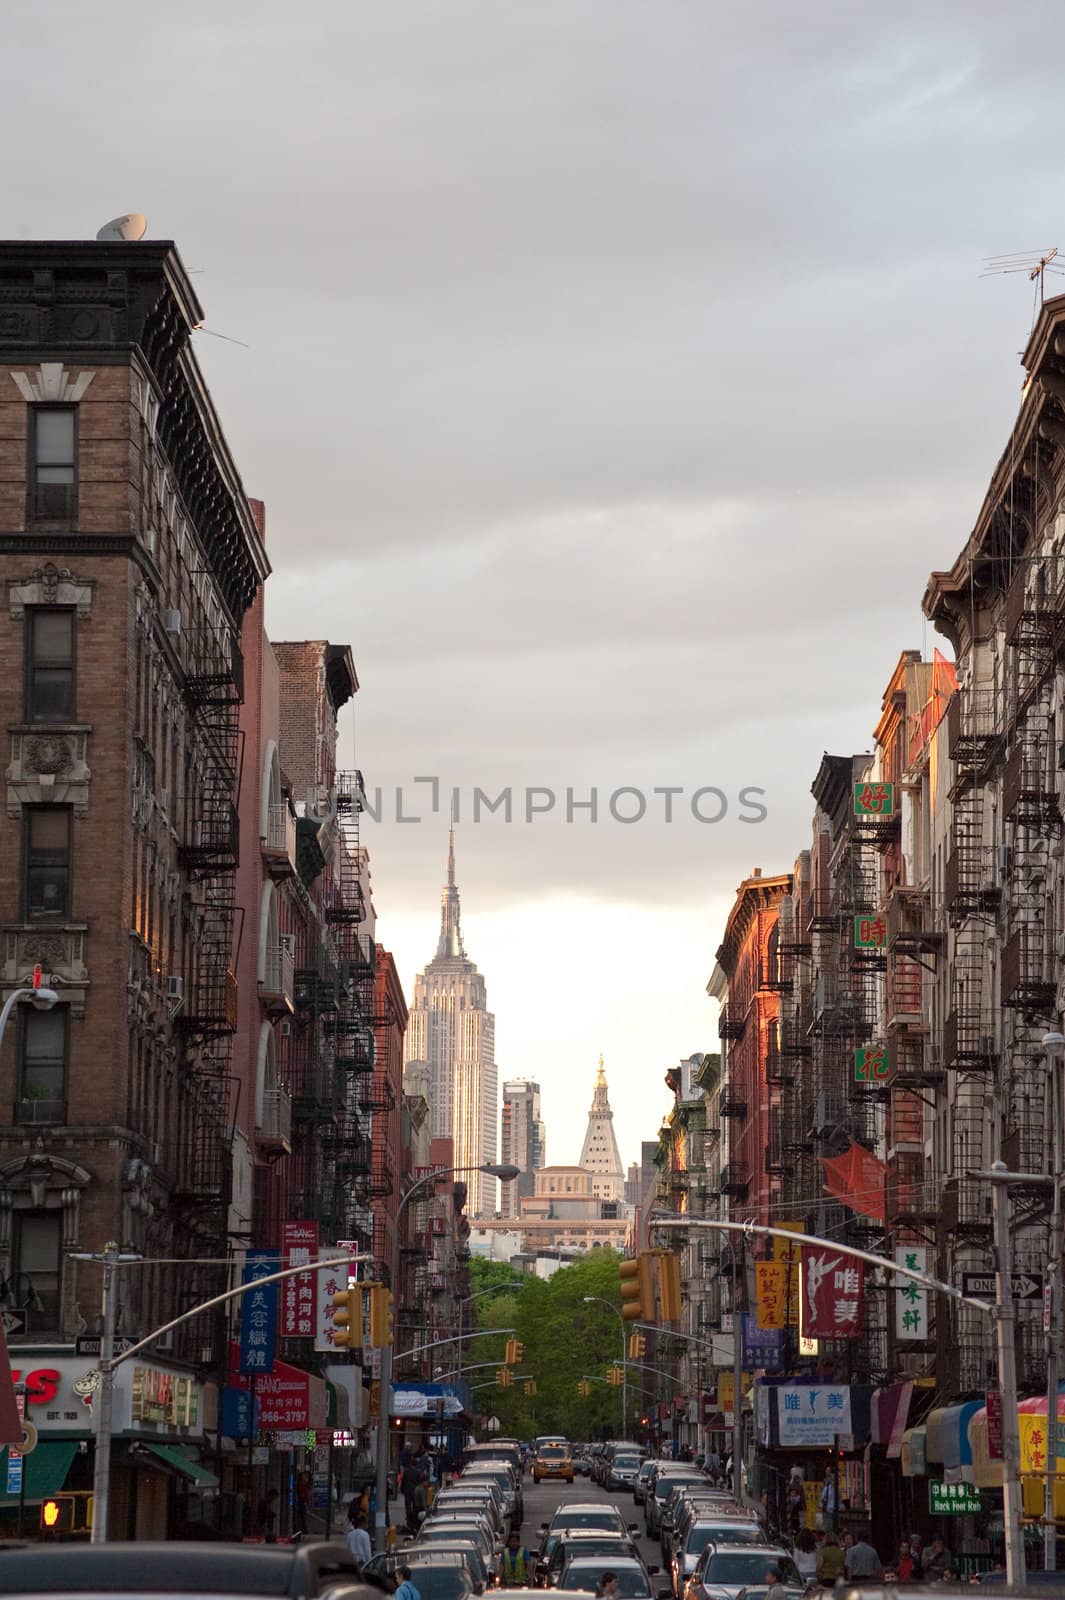 Chinatown and the Empire State Building.  New York City by rongreer